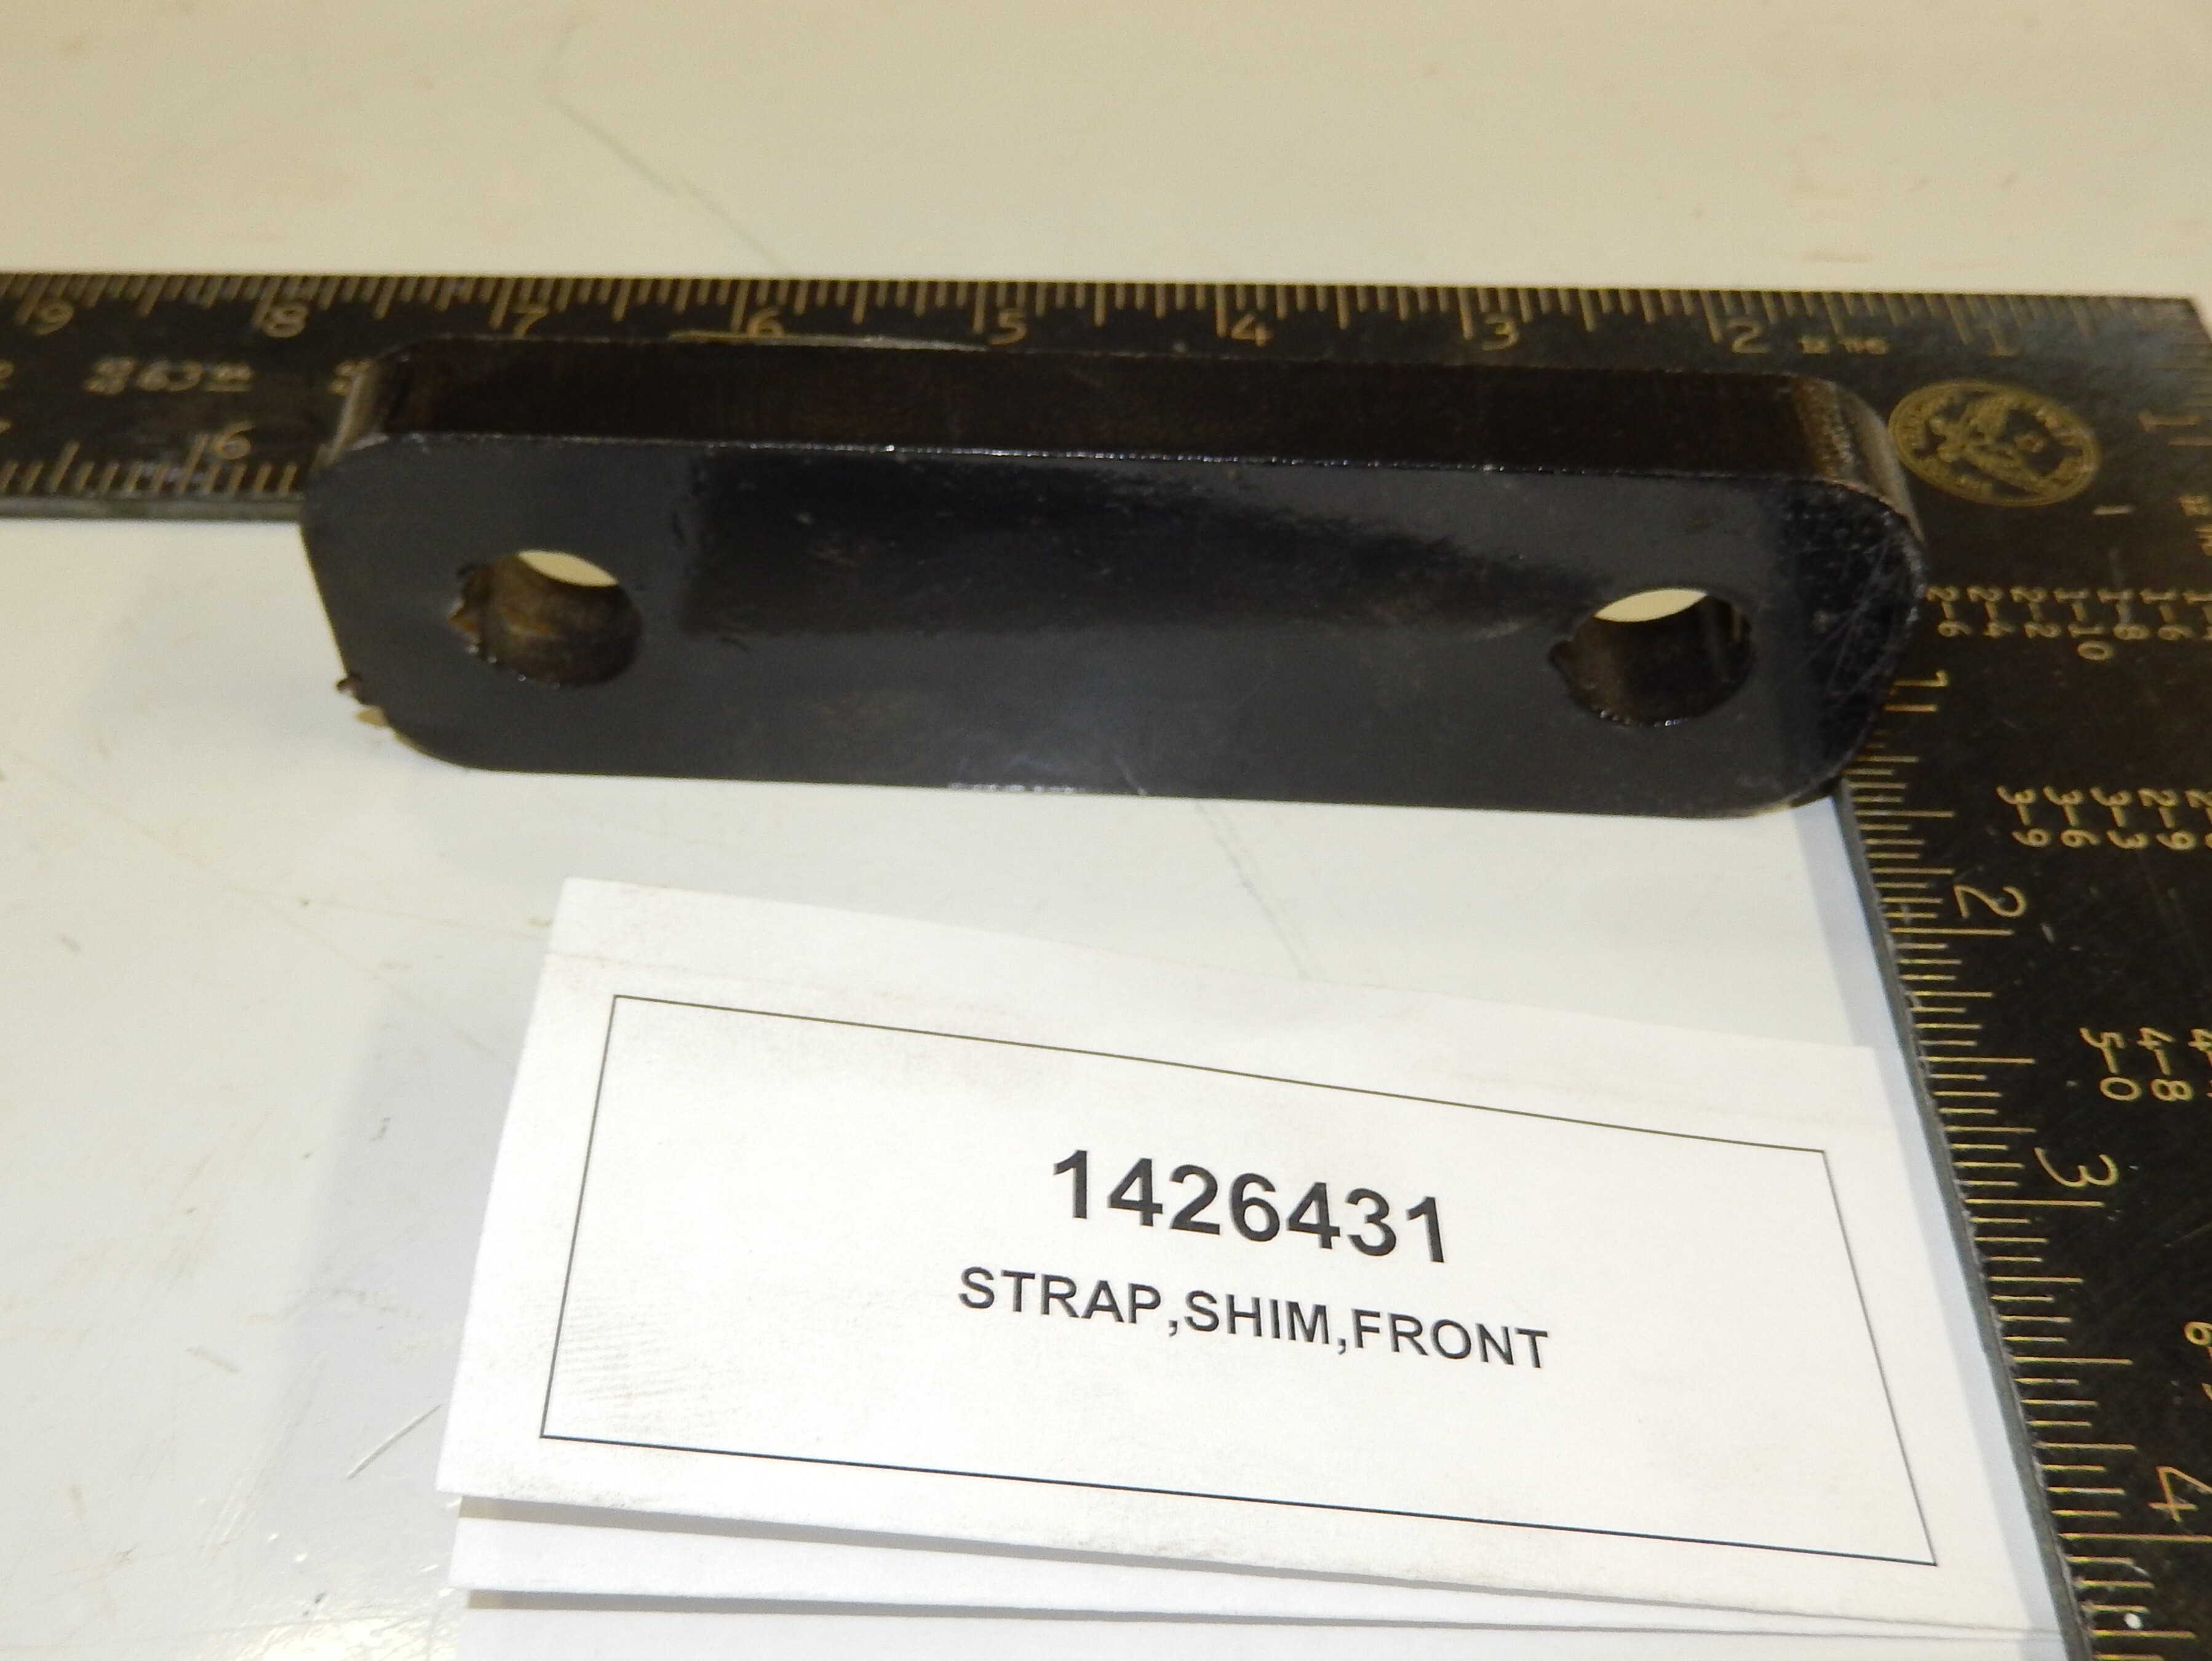 STRAP,SHIM,FRONT